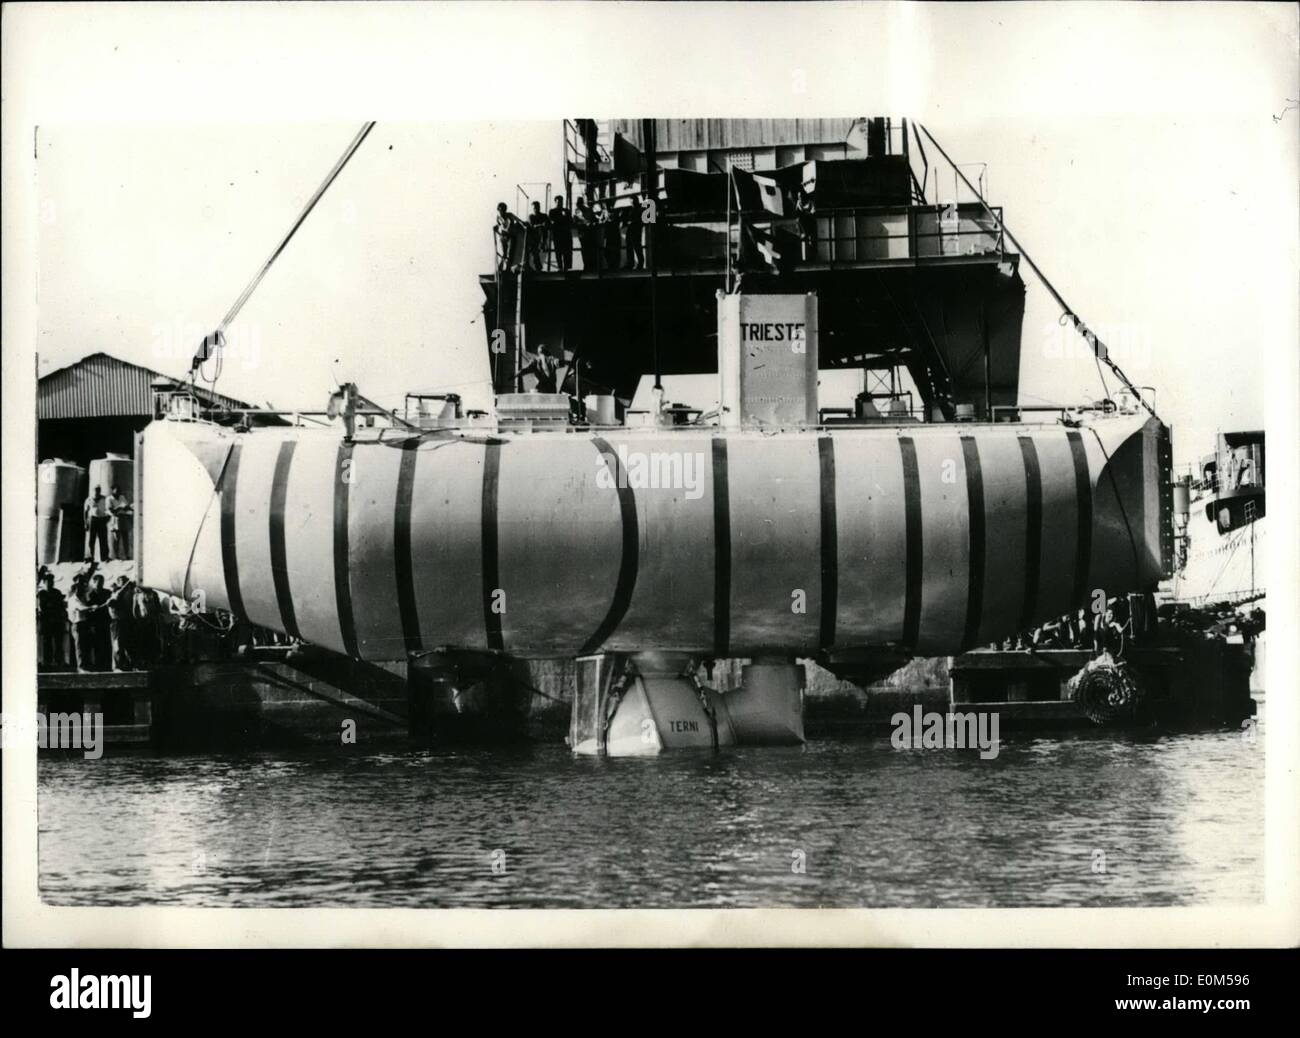 Aug. 08, 1953 - Professor Piccard's ''Bathysphere' Is Launched In Italy: Professor Piccard's ''bathysphere'', the vessel in which the professor hopes to explore the dephs of the Tyrrhenean Sea, and set up a record dive of 13,000-ft., was launched at Castellamare di Stabia, Italy. The vessel consists of two main parts - a cigar-shaped structure of watertight compartments which will house the special liquid which will be used for surfacing, and a lower part which is the actual sphere from which observations will be made Stock Photo